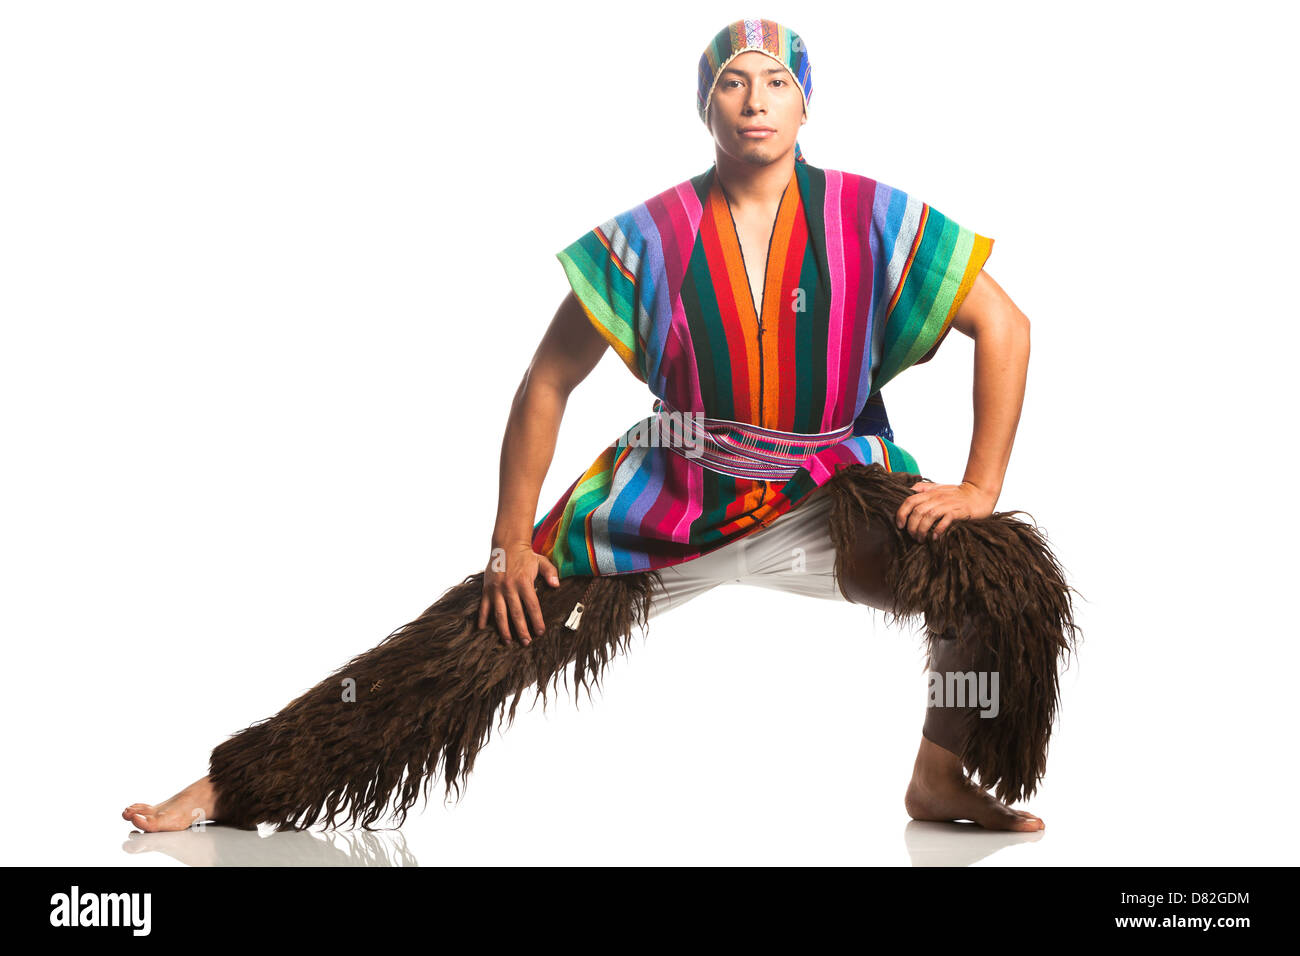 Ecuadorian Dancer Dressed Up In Traditional Costume From The Highlands Llama Or Alpaca Pants Studio Shot Isolated On White Stock Photo